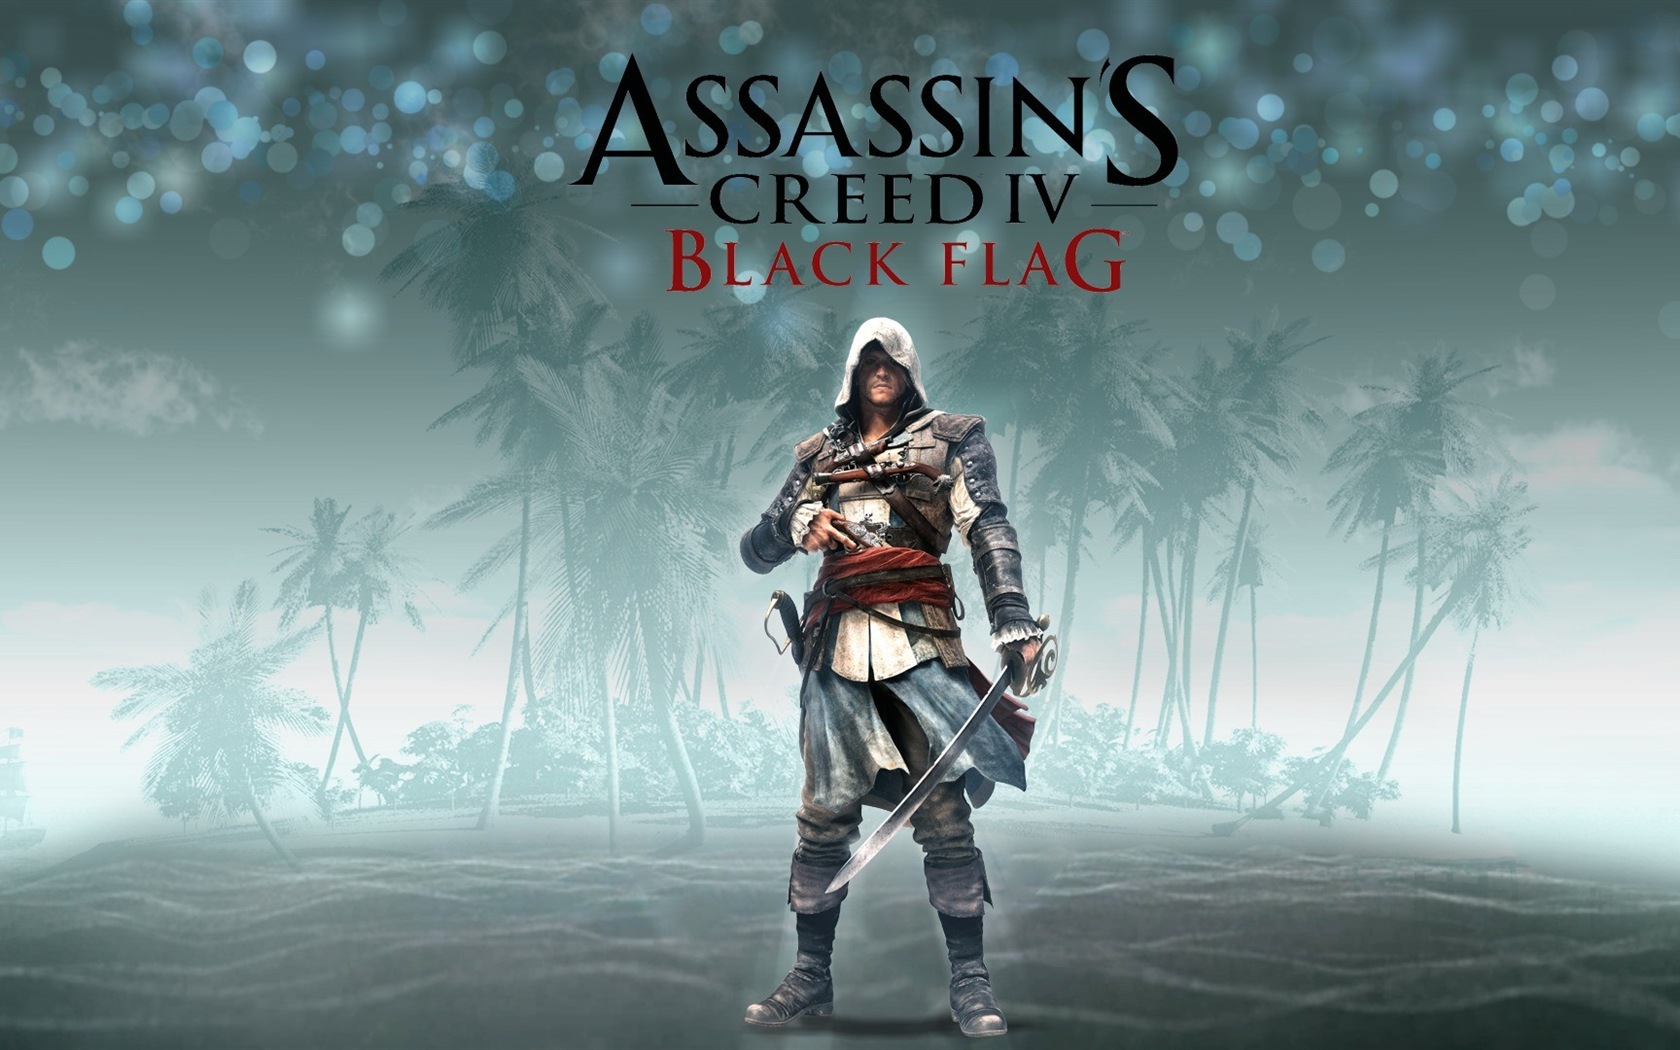 Creed IV Assassin: Black Flag HD wallpapers #14 - 1680x1050